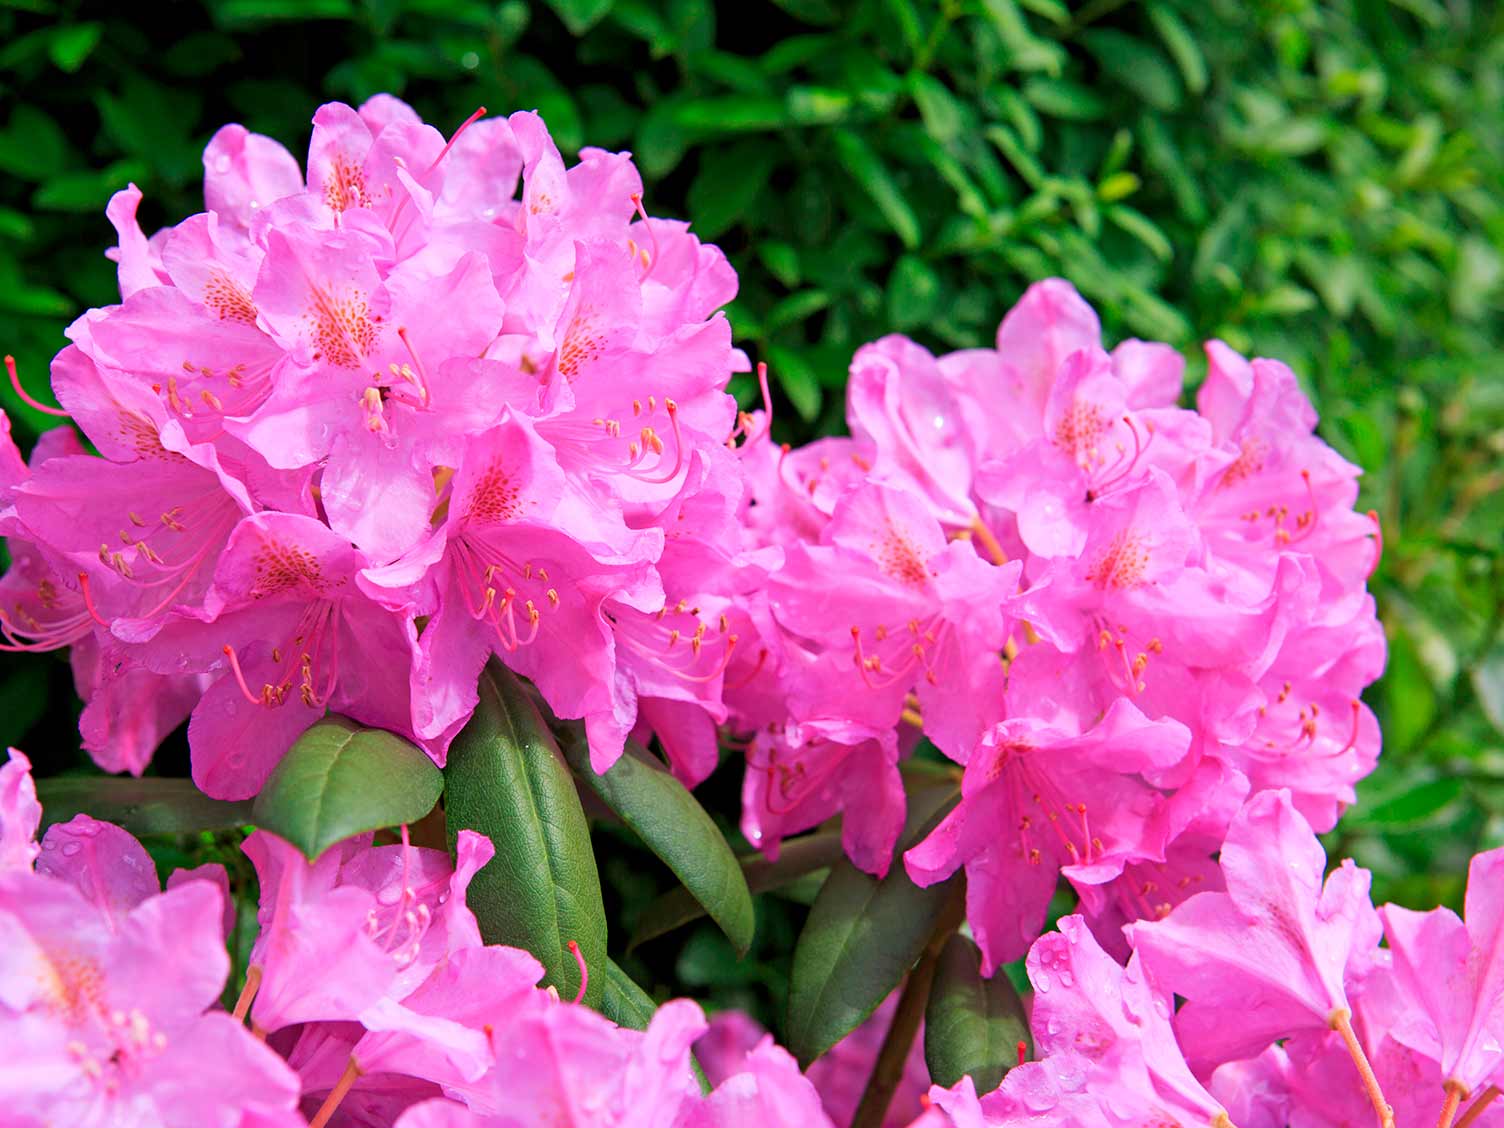 Image of Rhododendron ericaceous shrub